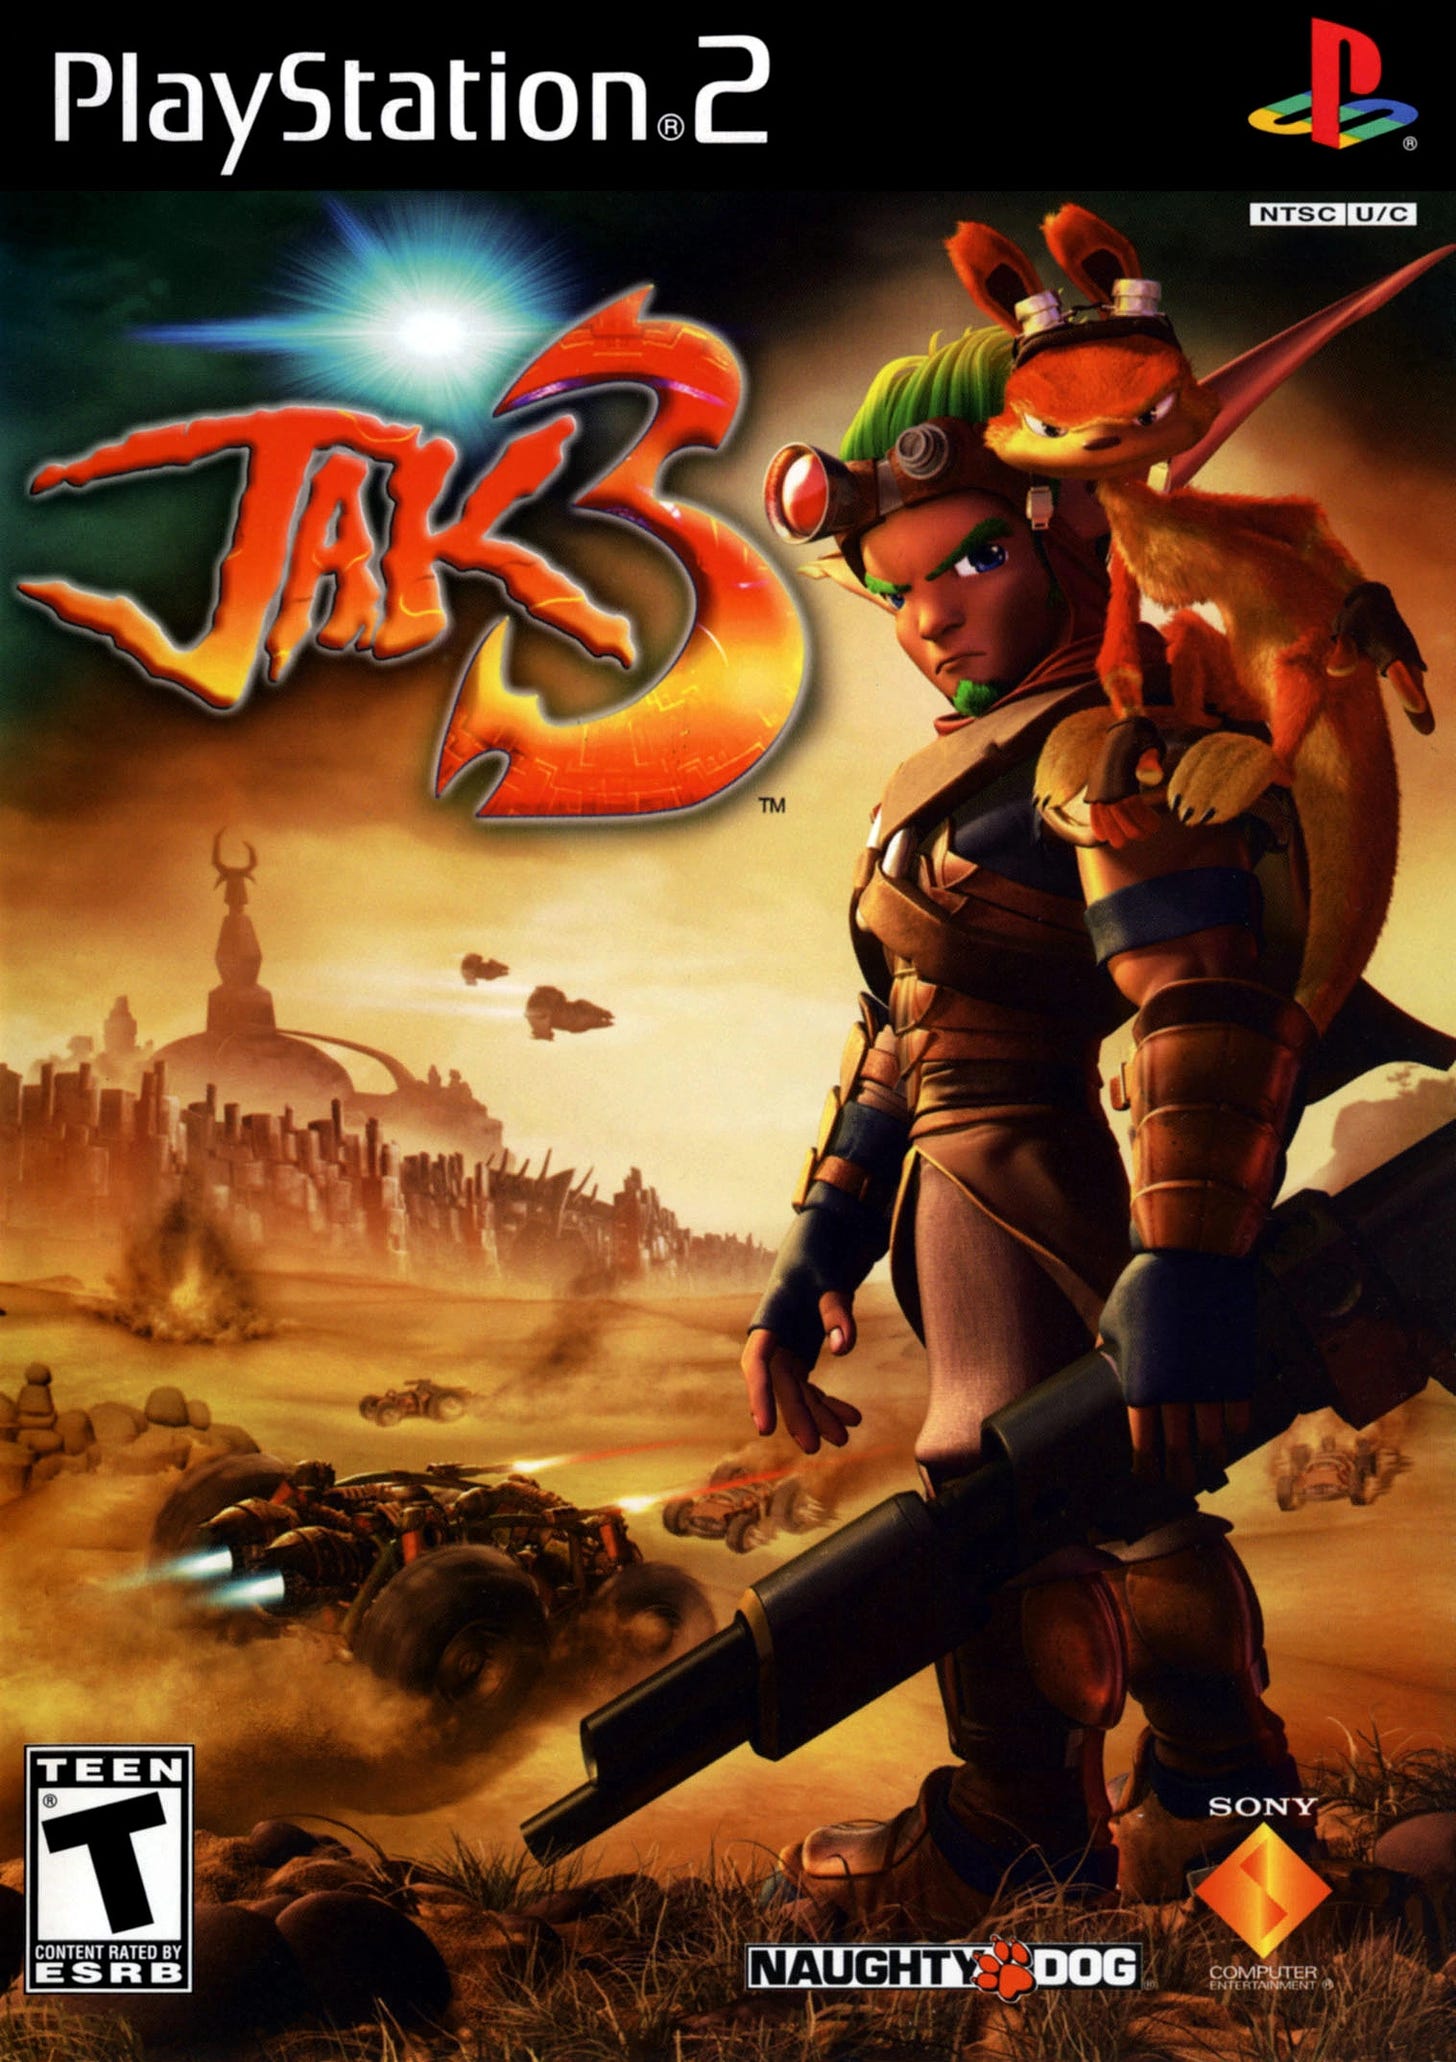 Jak 3 in the Jak and Daxter series for PS2 was made using the LISP language GOAL.